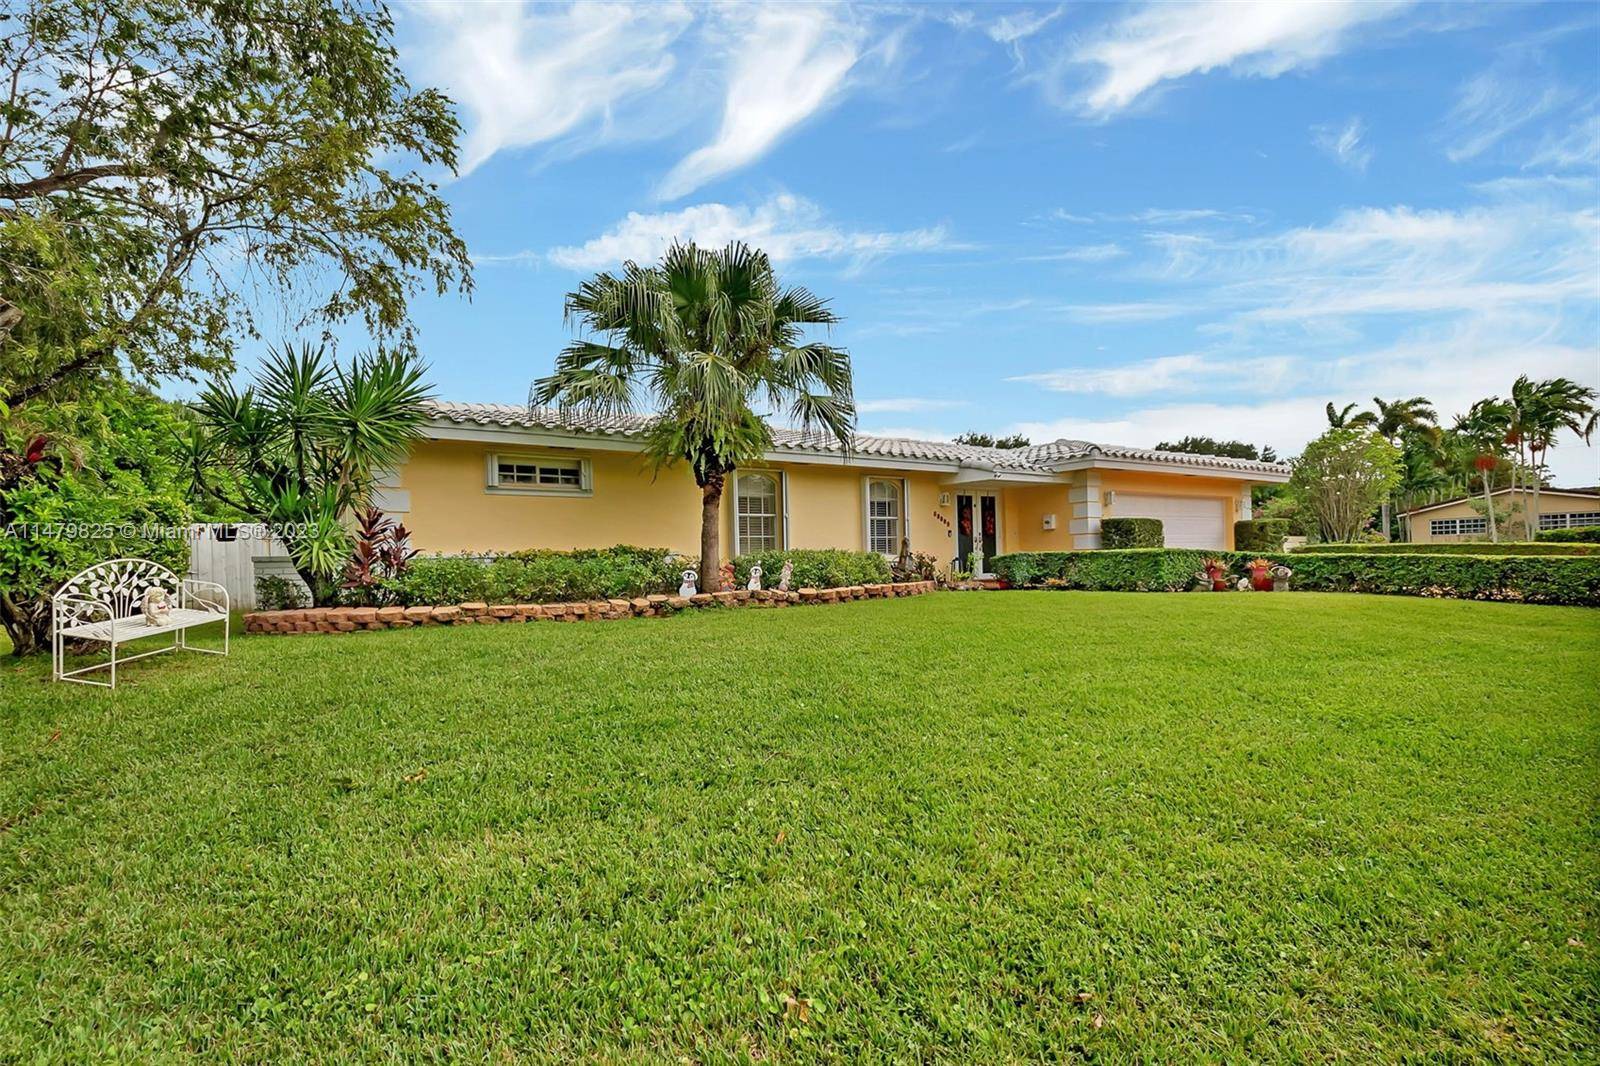 This beautiful one owner single family home nestled in the beautiful neighborhood of Palmetto Bay with exceptional curb appeal and is situated on a corner lot in the tranquil cul ...